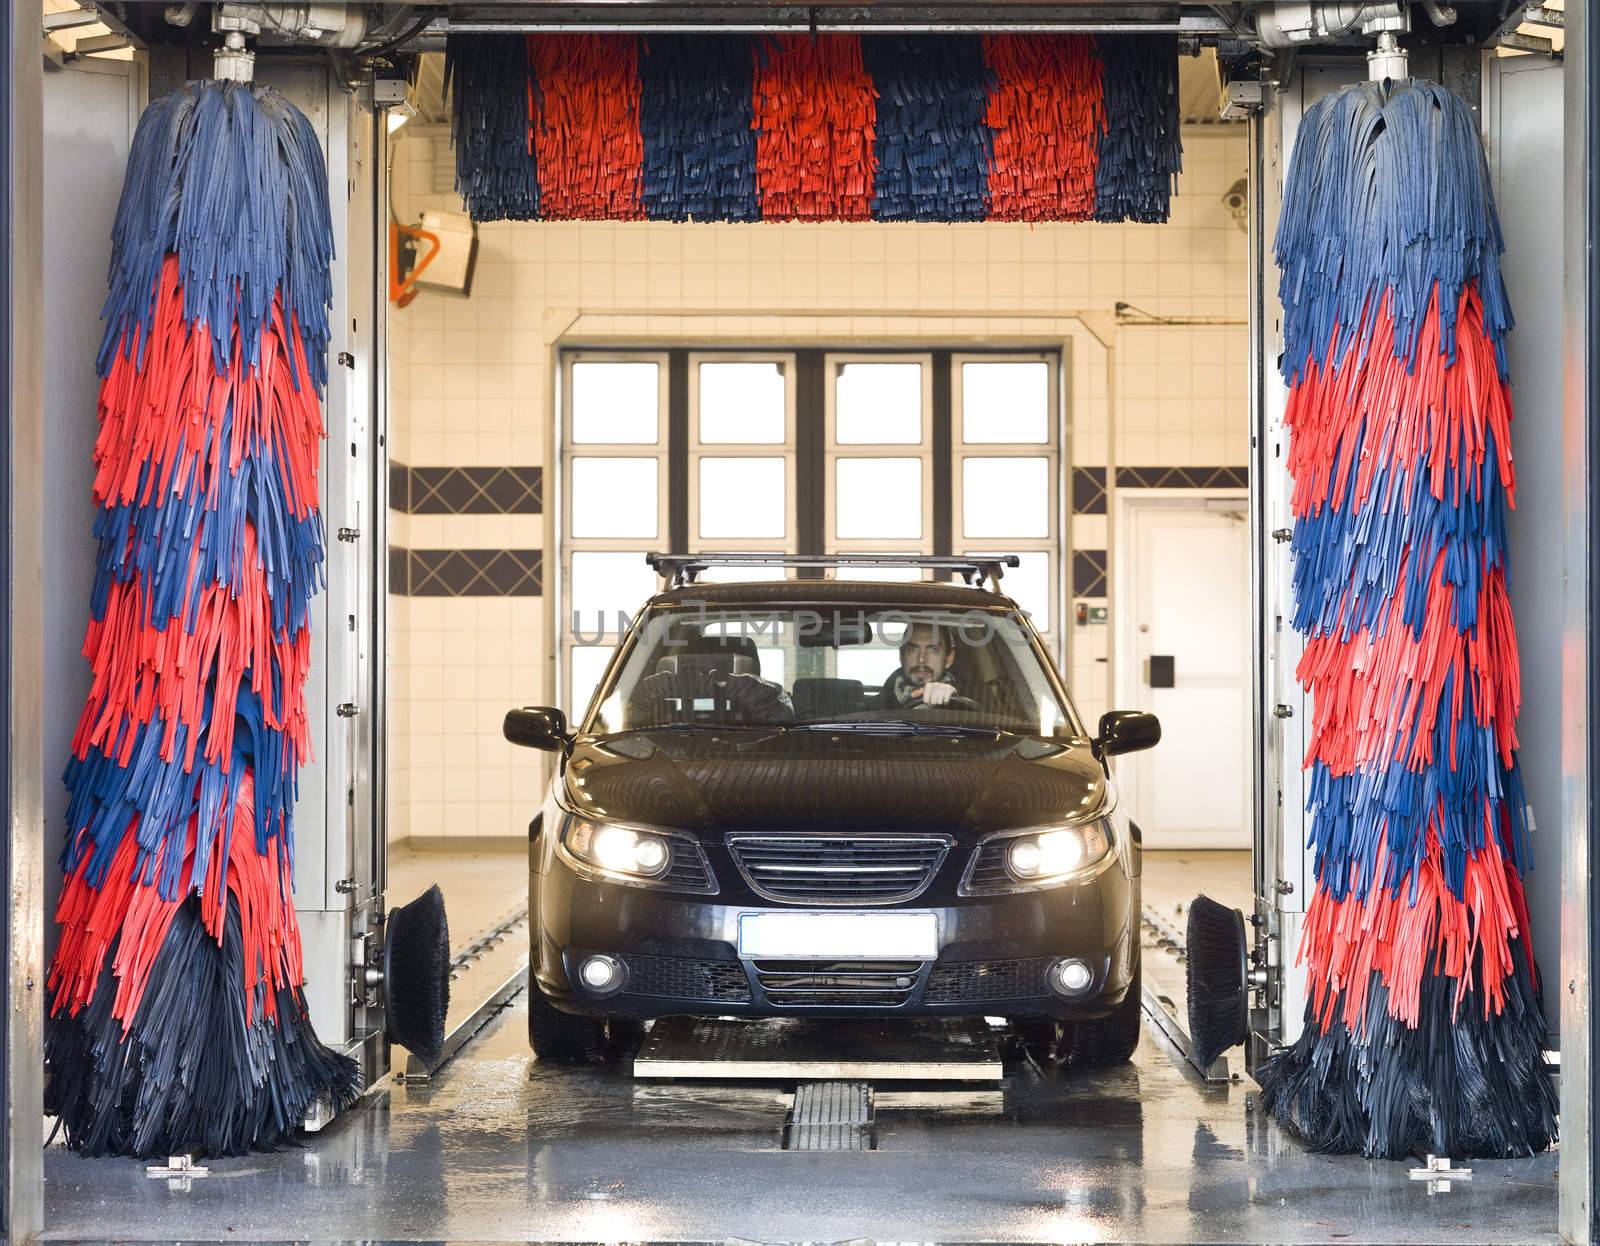 Black car with a male driver washing the car in a car wash